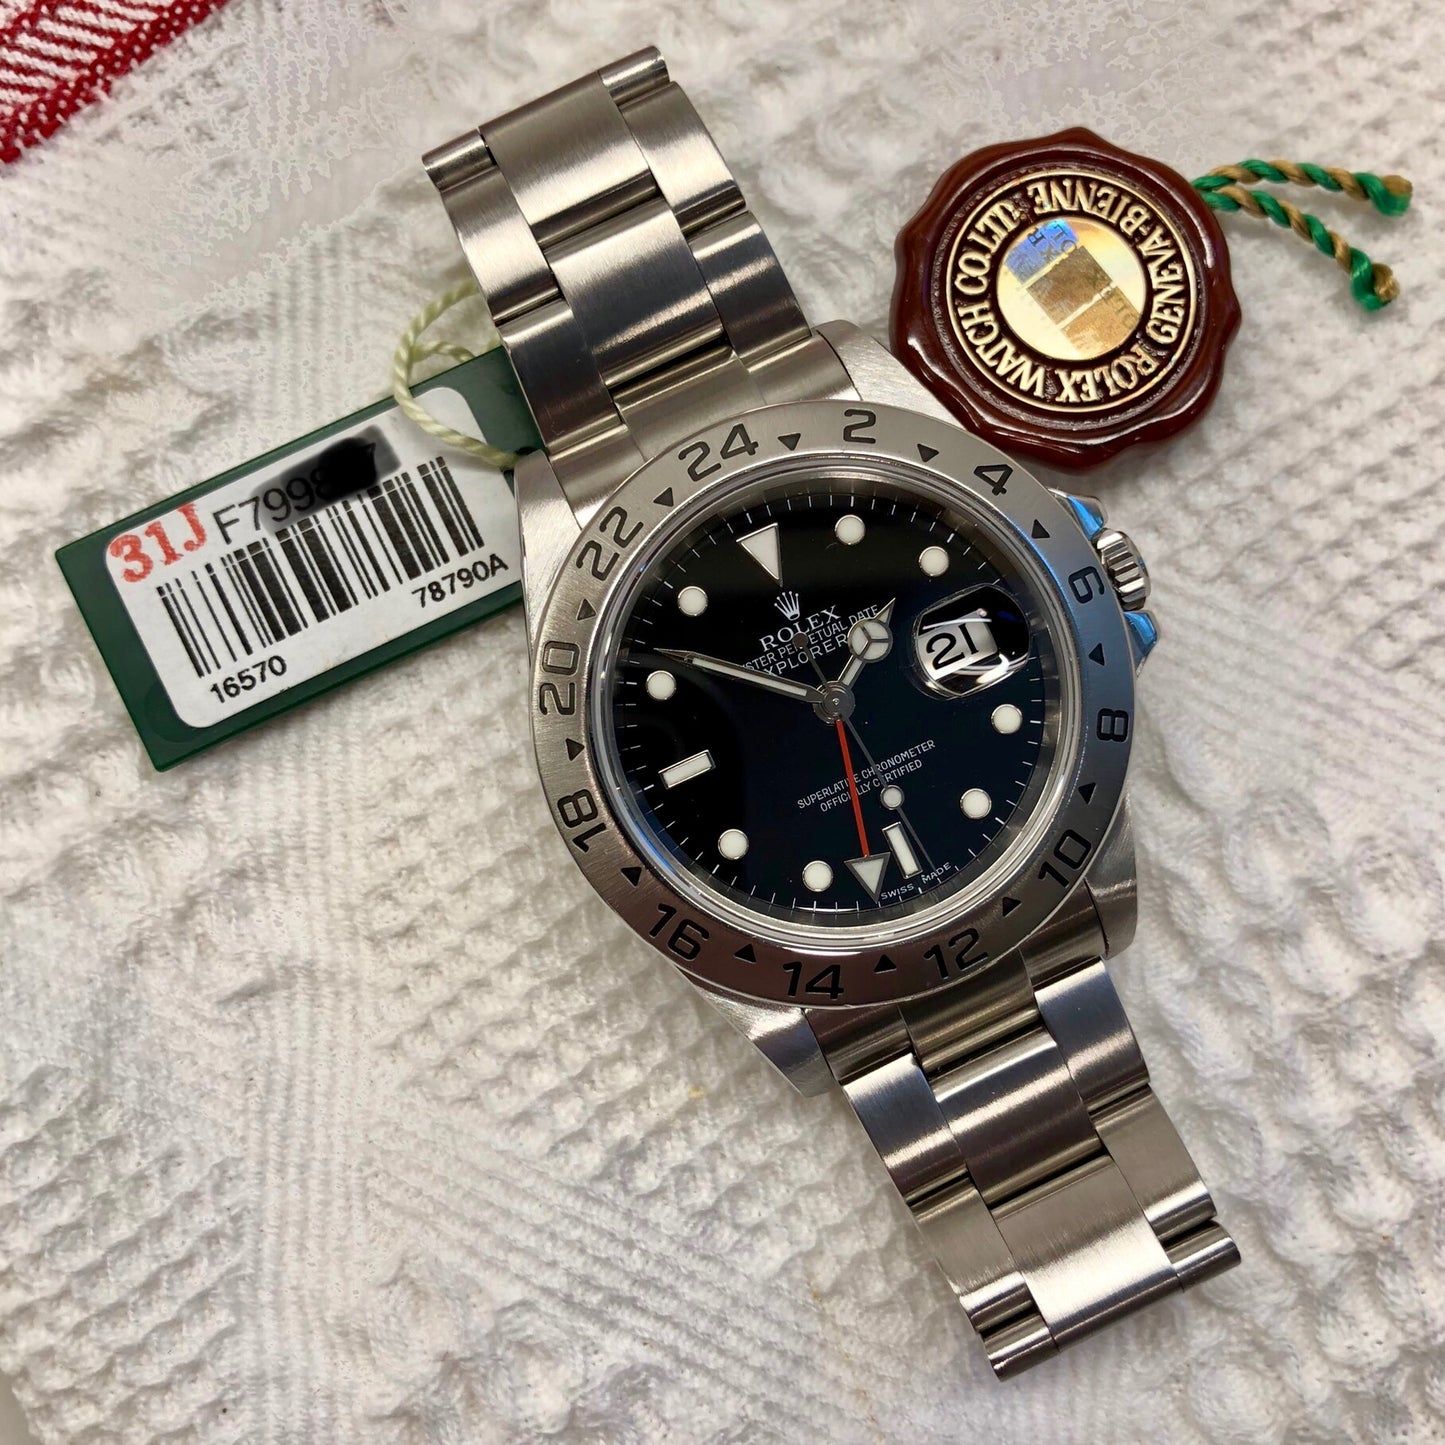 Rolex Explorer II 16570 Stainless Steel GMT Oyster F Serial Wristwatch Box Papers Circa 2003 - Hashtag Watch Company